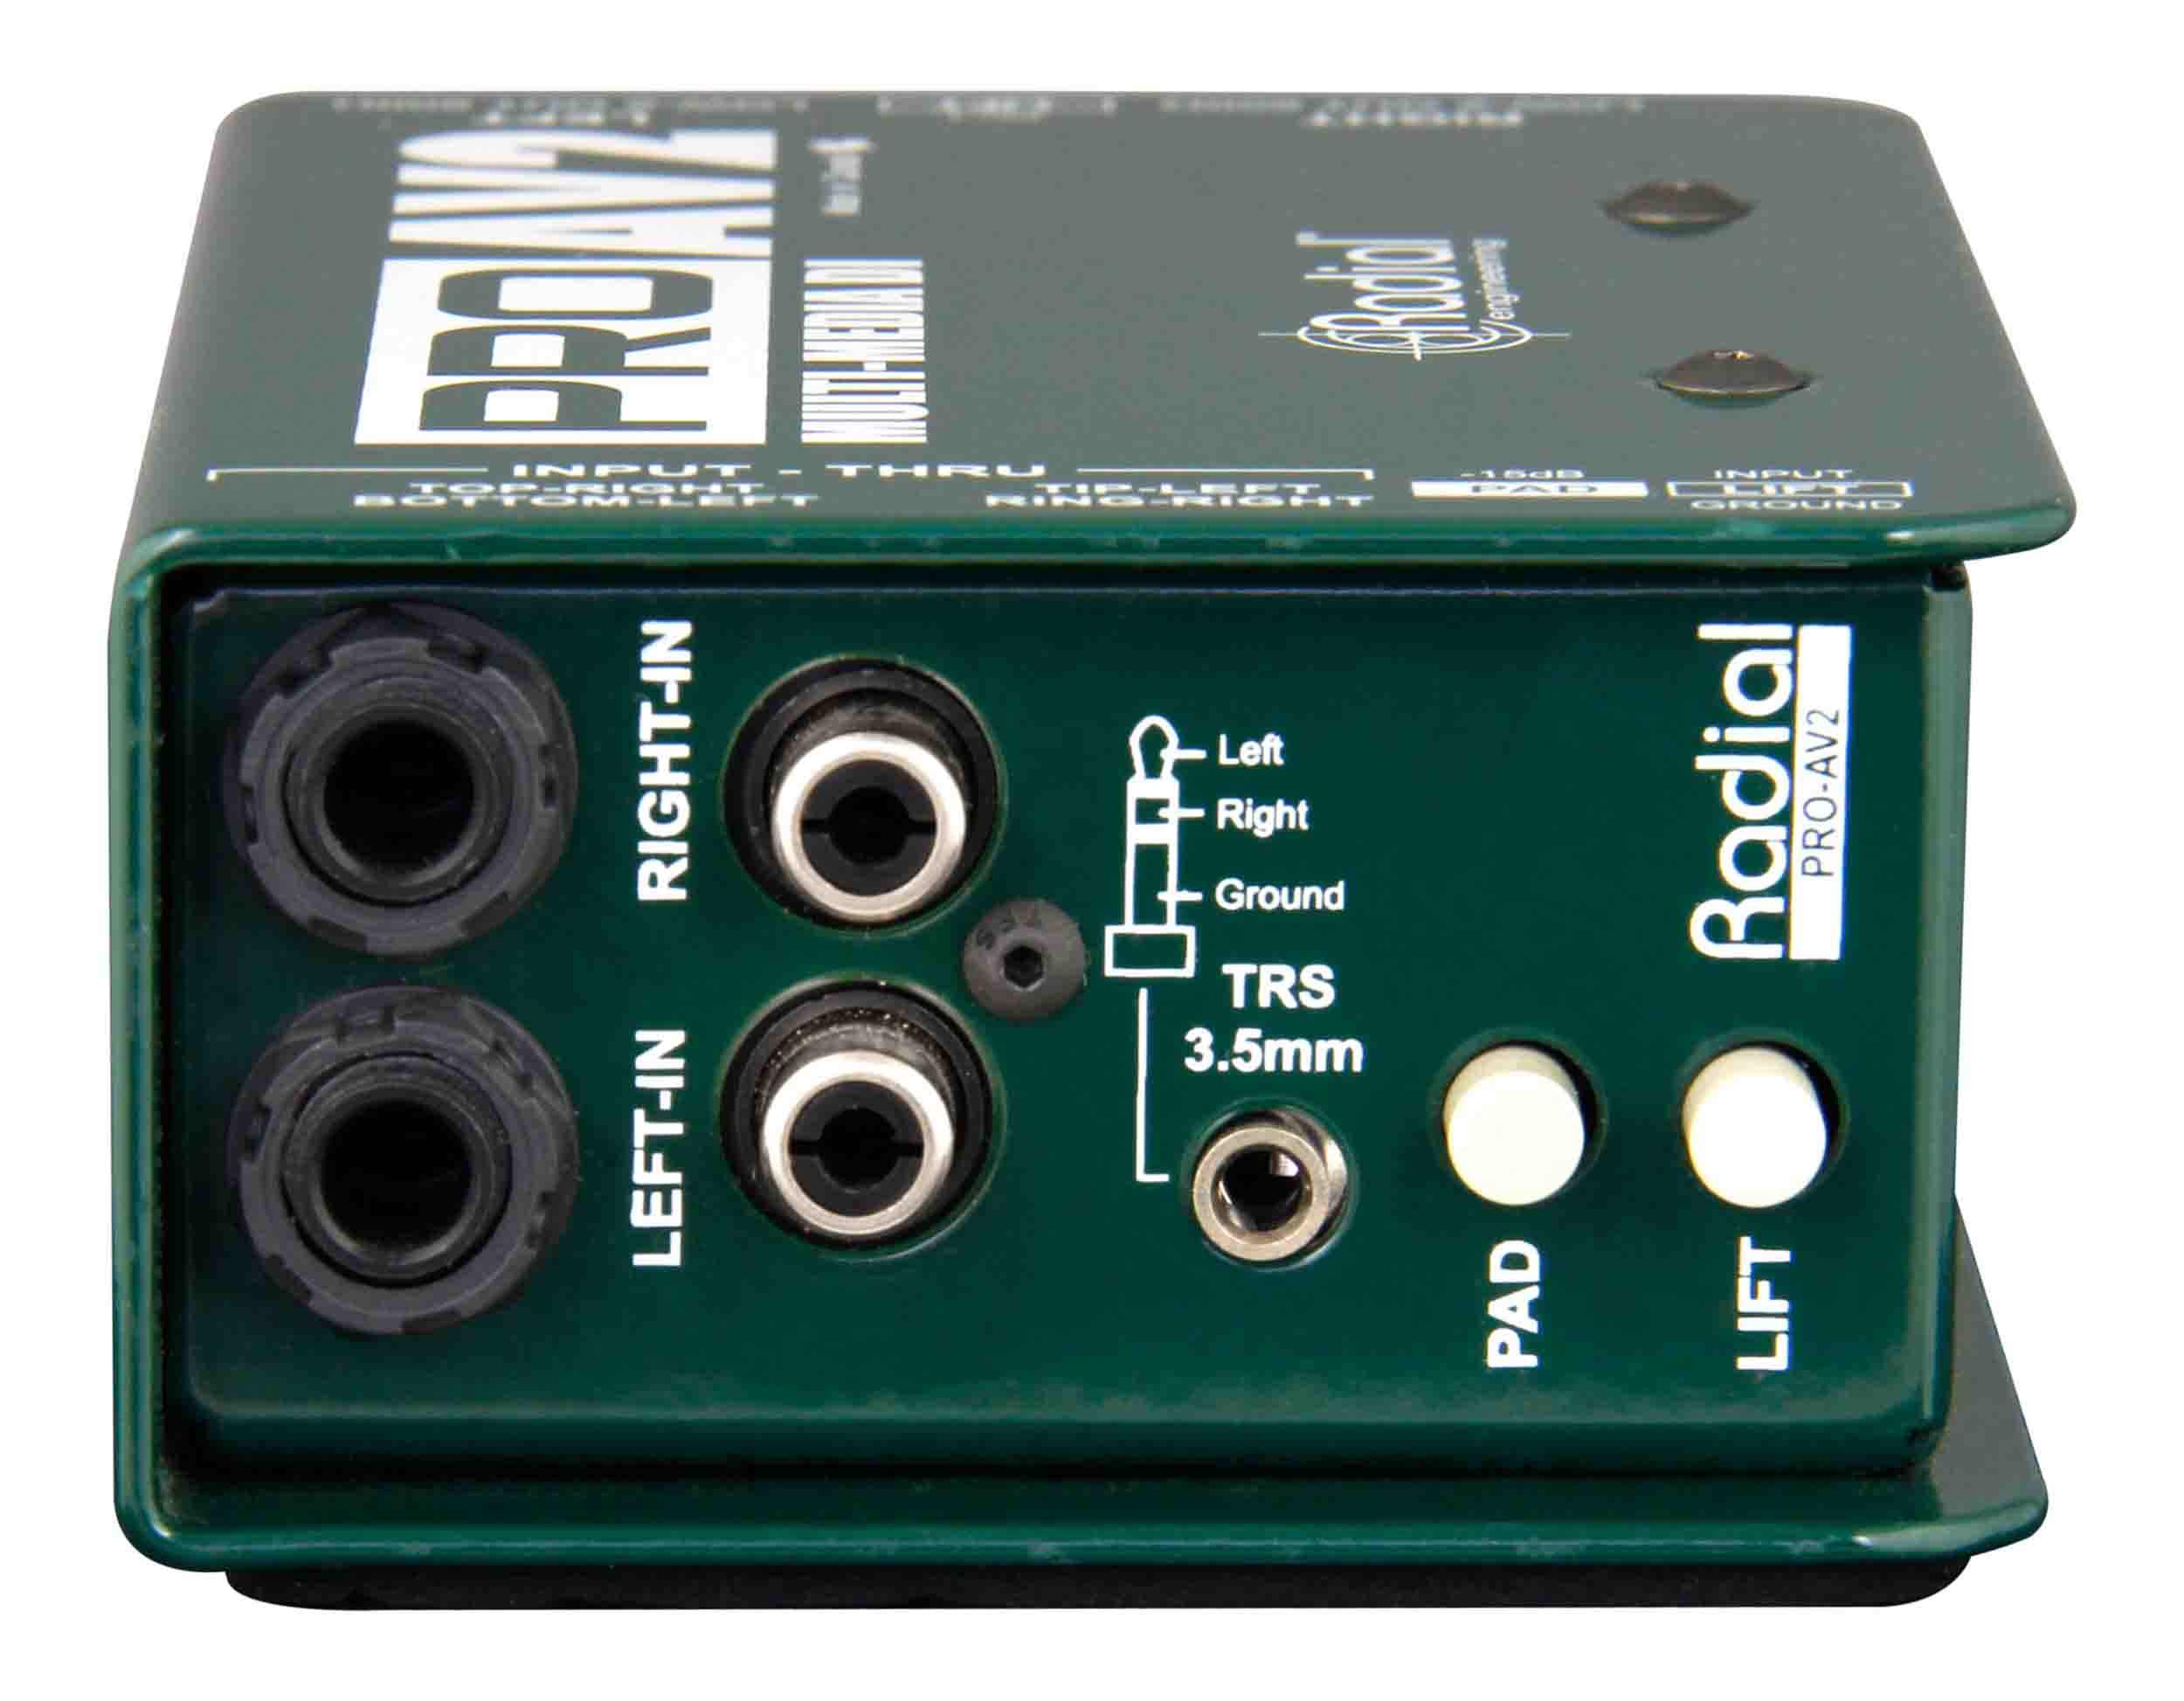 Radial Engineering ProAV2 Passive Stereo Multimedia Direct Box by Radial Engineering